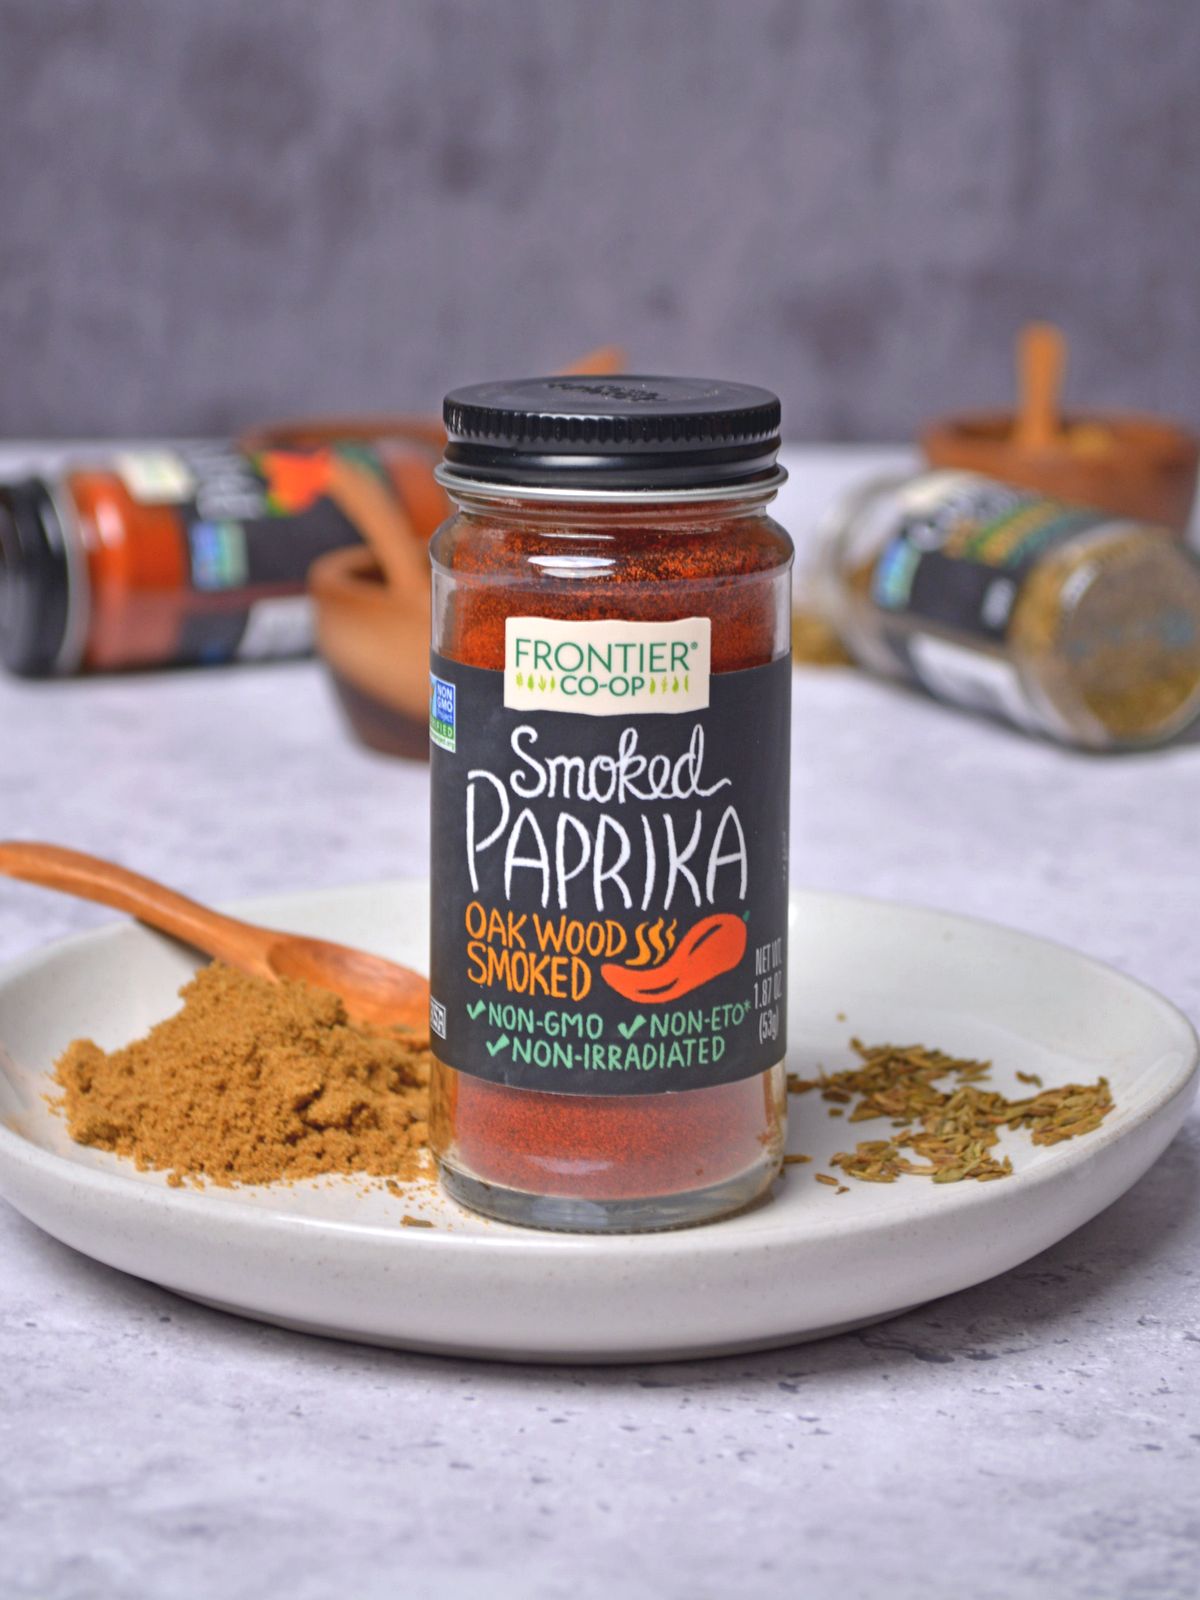 Paprika in a spice jar set on a white plate with ground paprika on the plate